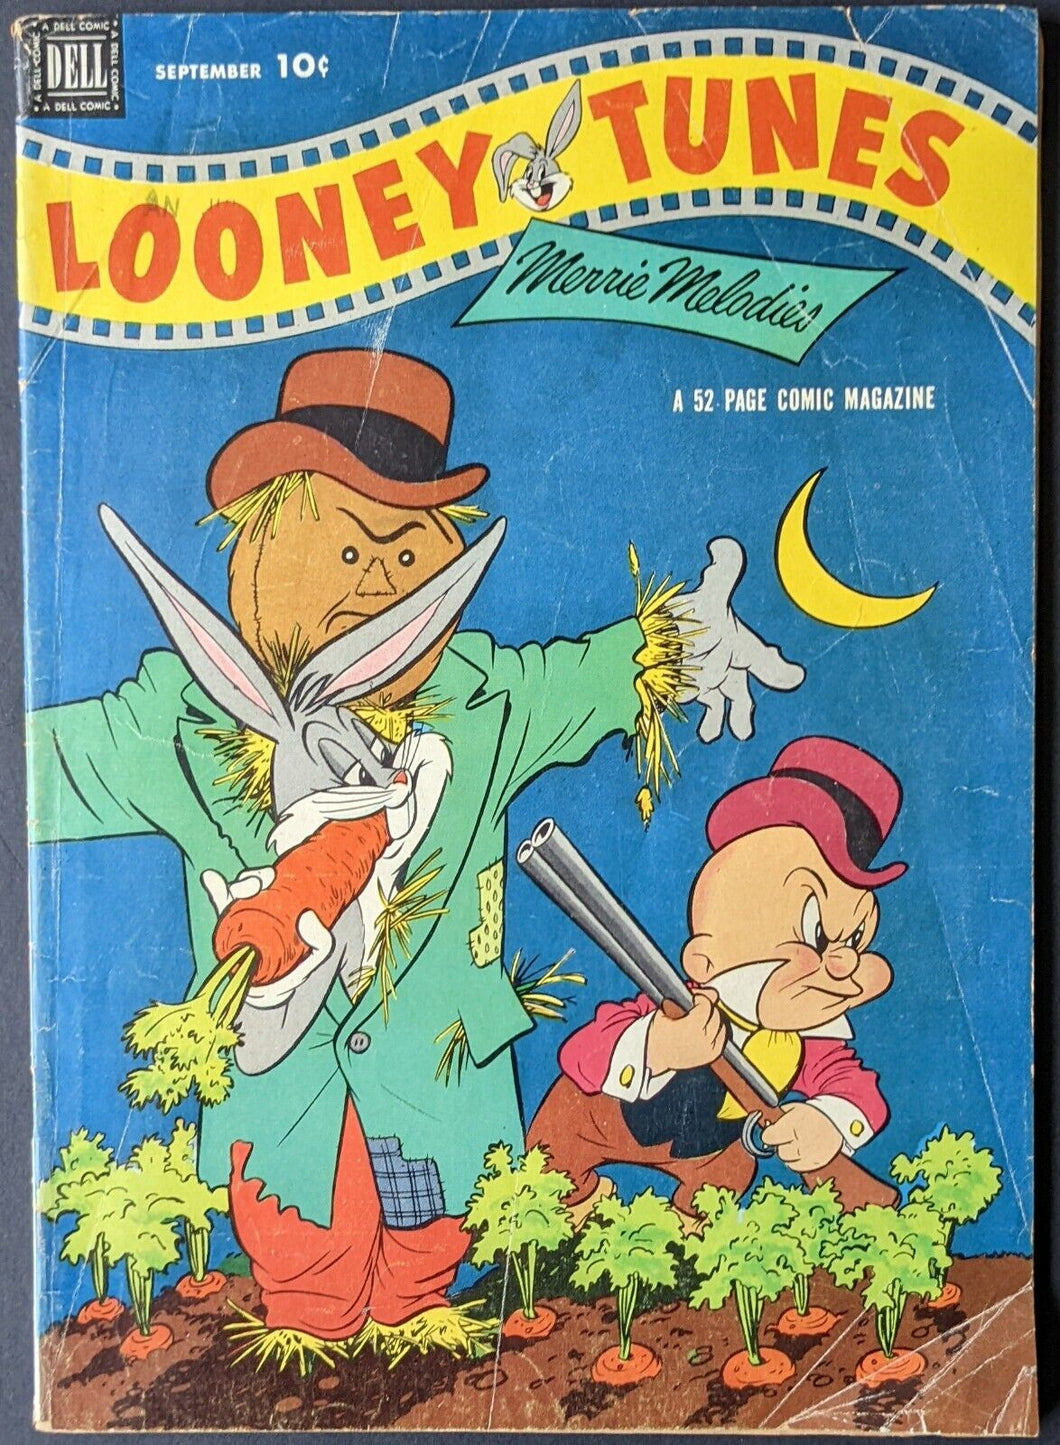 1952 Looney Tunes Comic Book Ball Player Preacher Roe Front Cover Vintage